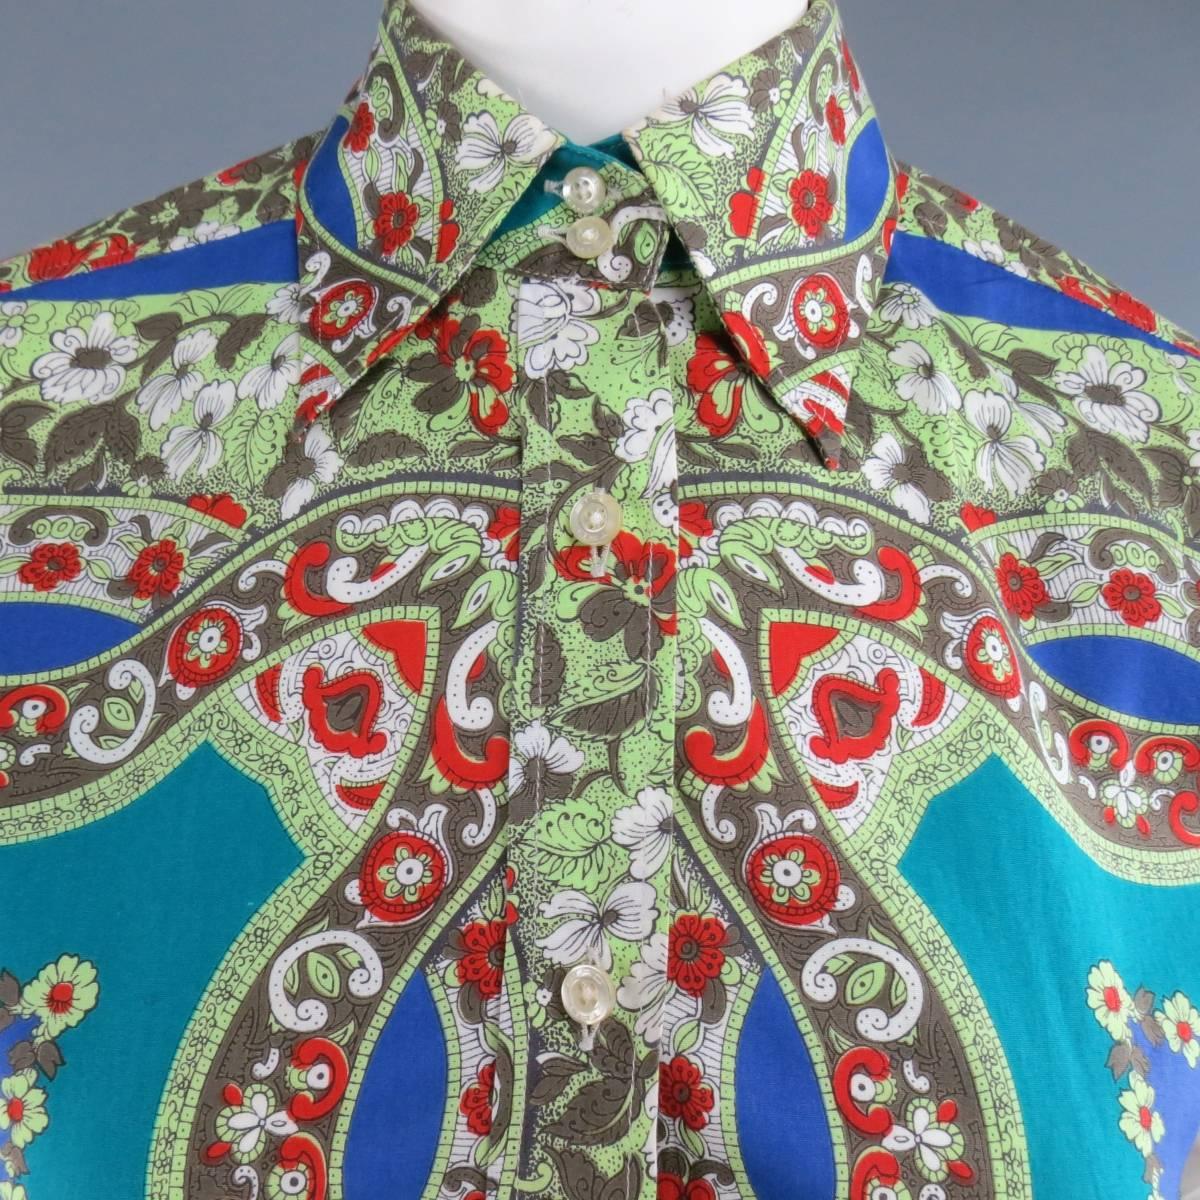 ETRO blouse in a teal and blue cotton with all over green and red floral bandanna print. Made in Italy.
 
Good Pre-Owned Condition.
Marked: IT 50
 
Measurements:
 
Shoulder: 16 in.
Bust: 46 in.
Sleeve: 25 in.
Length: 27 in.